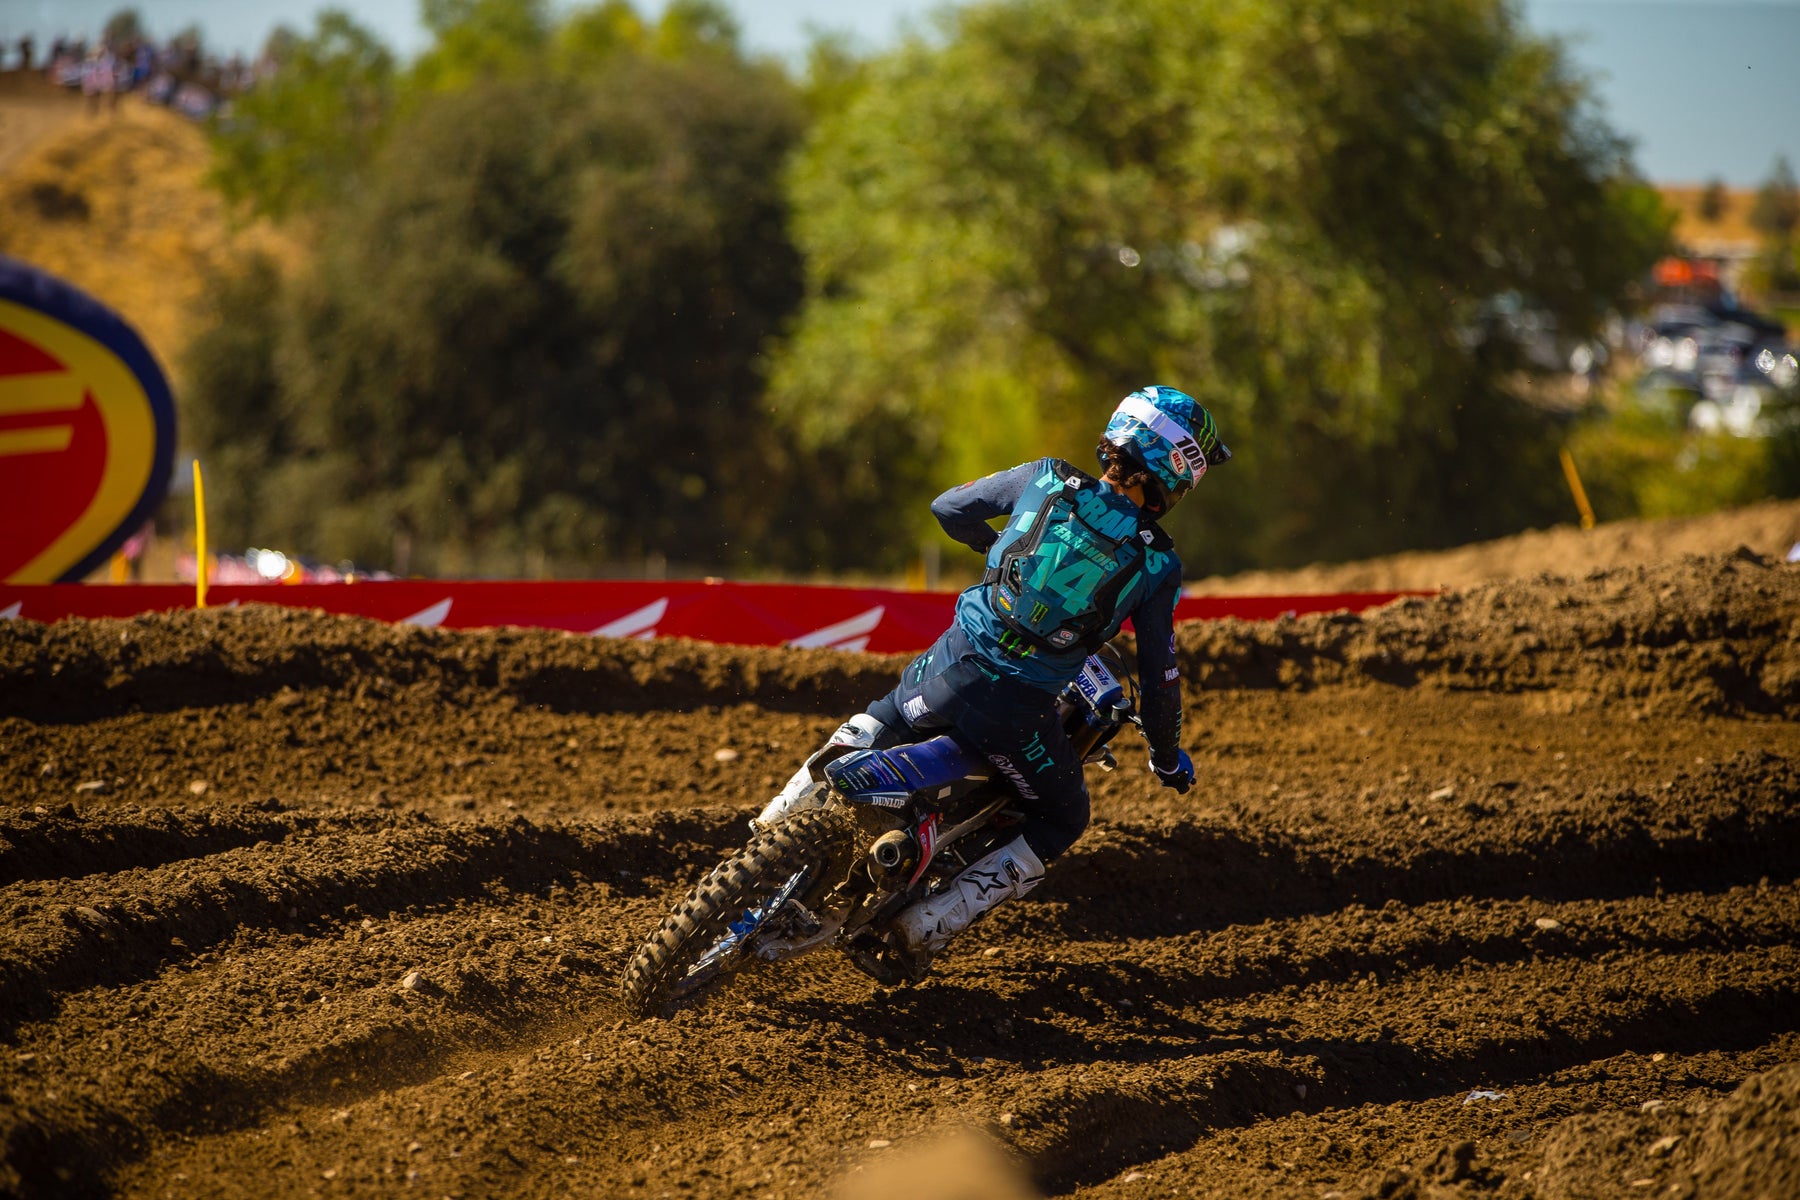 DYLAN FERRANDIS TAKES OVERALL 450MX WIN AT HANGTOWN, CALIFORNIA; ELI TOMAC SECOND, COOPER WEBB THIRD